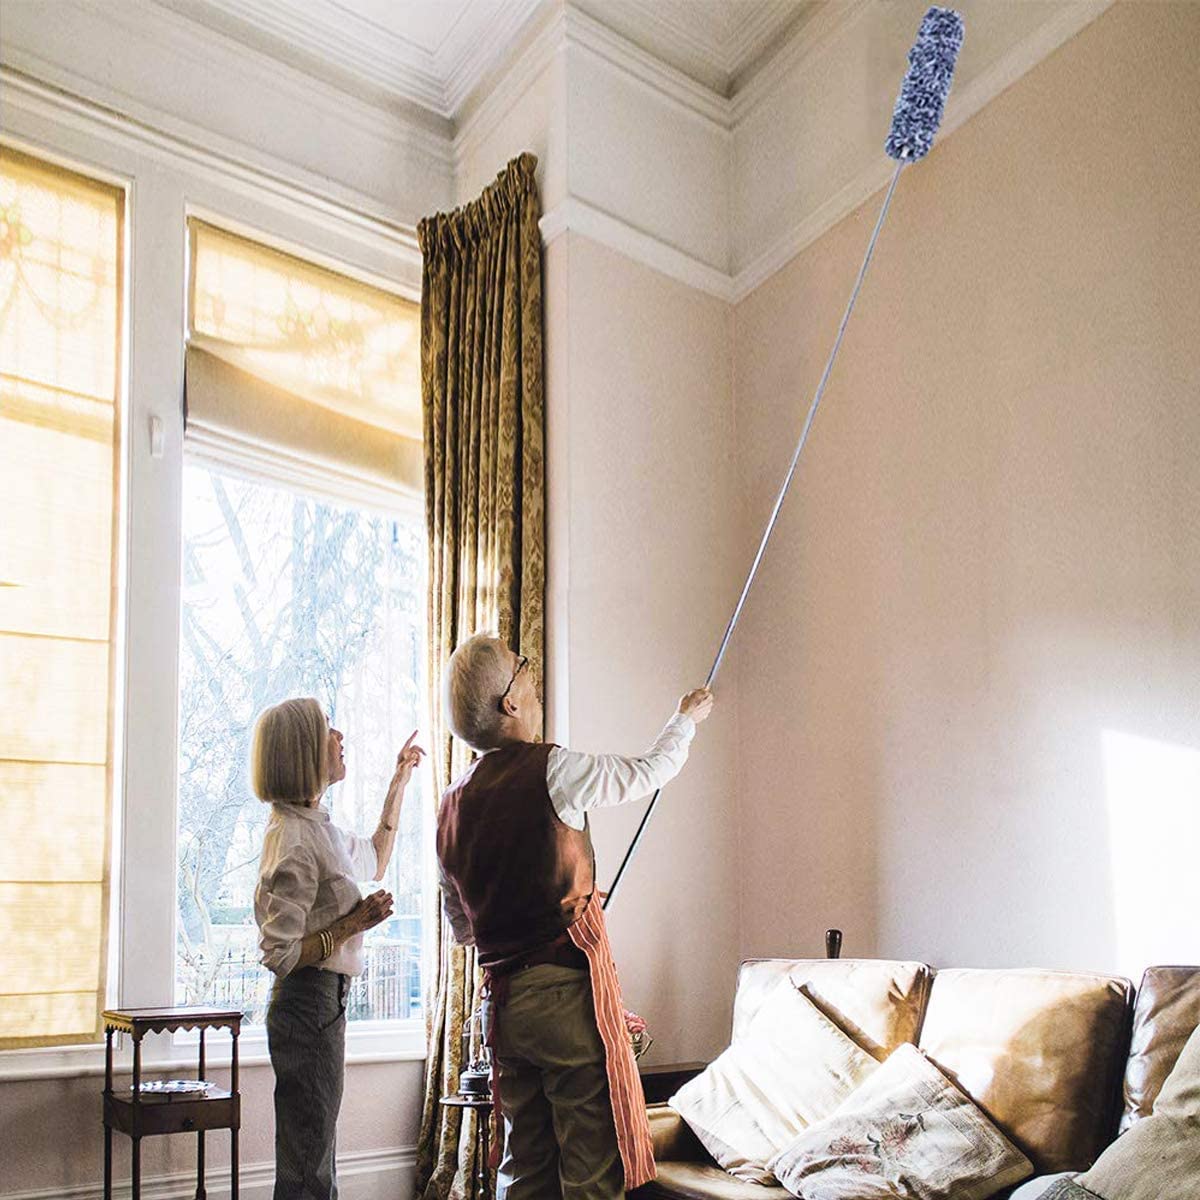 Cleaning Microfiber Fan Duster Fan Cleaner Duster Roof Cleaning - Bendable & Extendable Fan Ceiling Duster Sweepexo™️ Poshure®